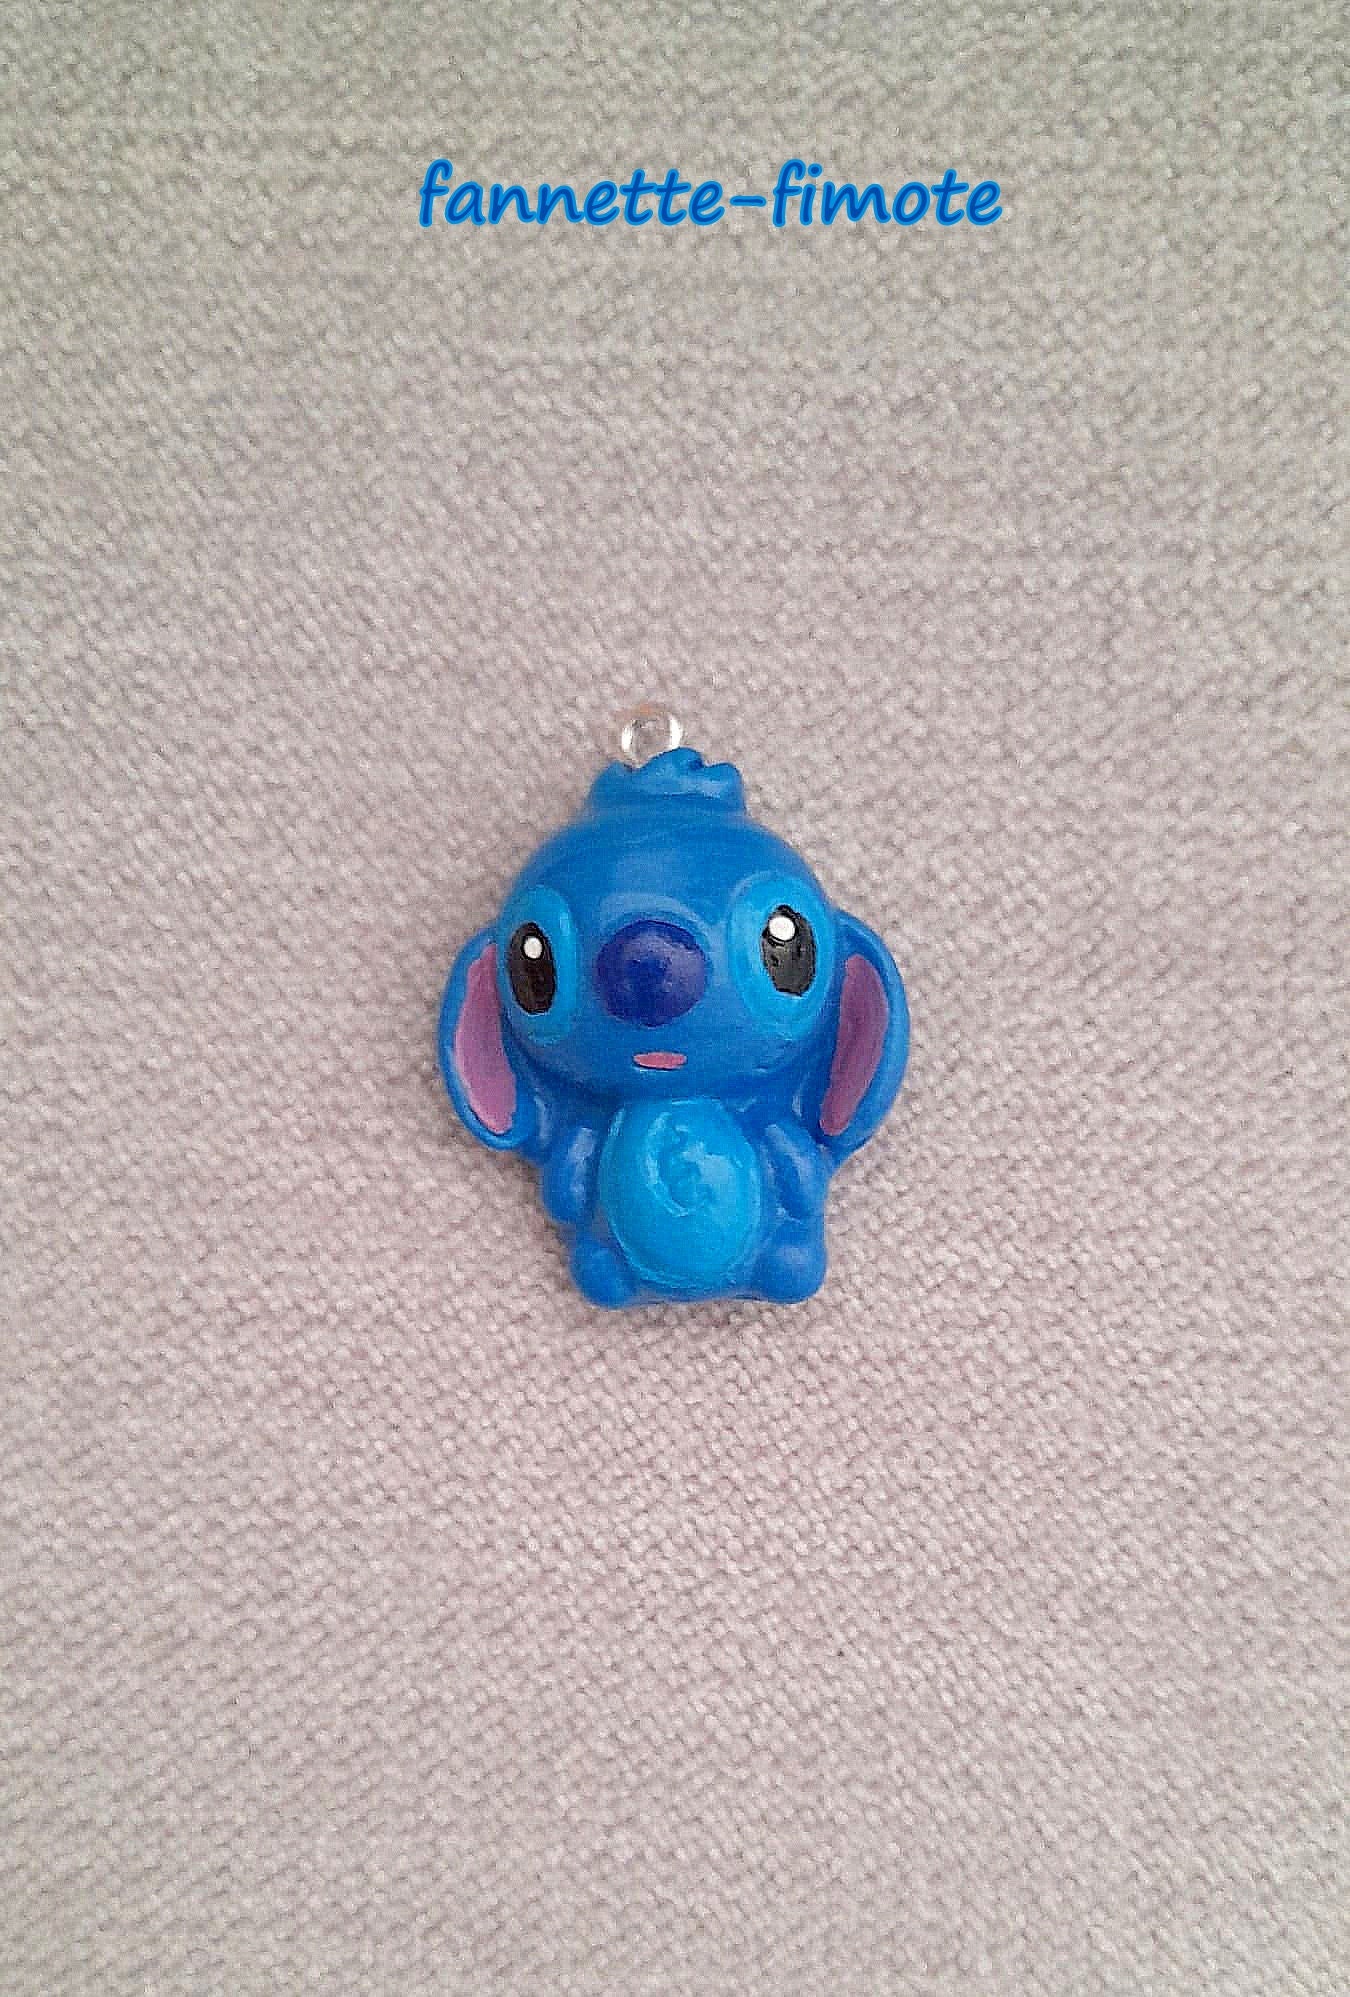 Stitch Charm Lilo and Stitch Charm Gifts for Her Birthday Gift